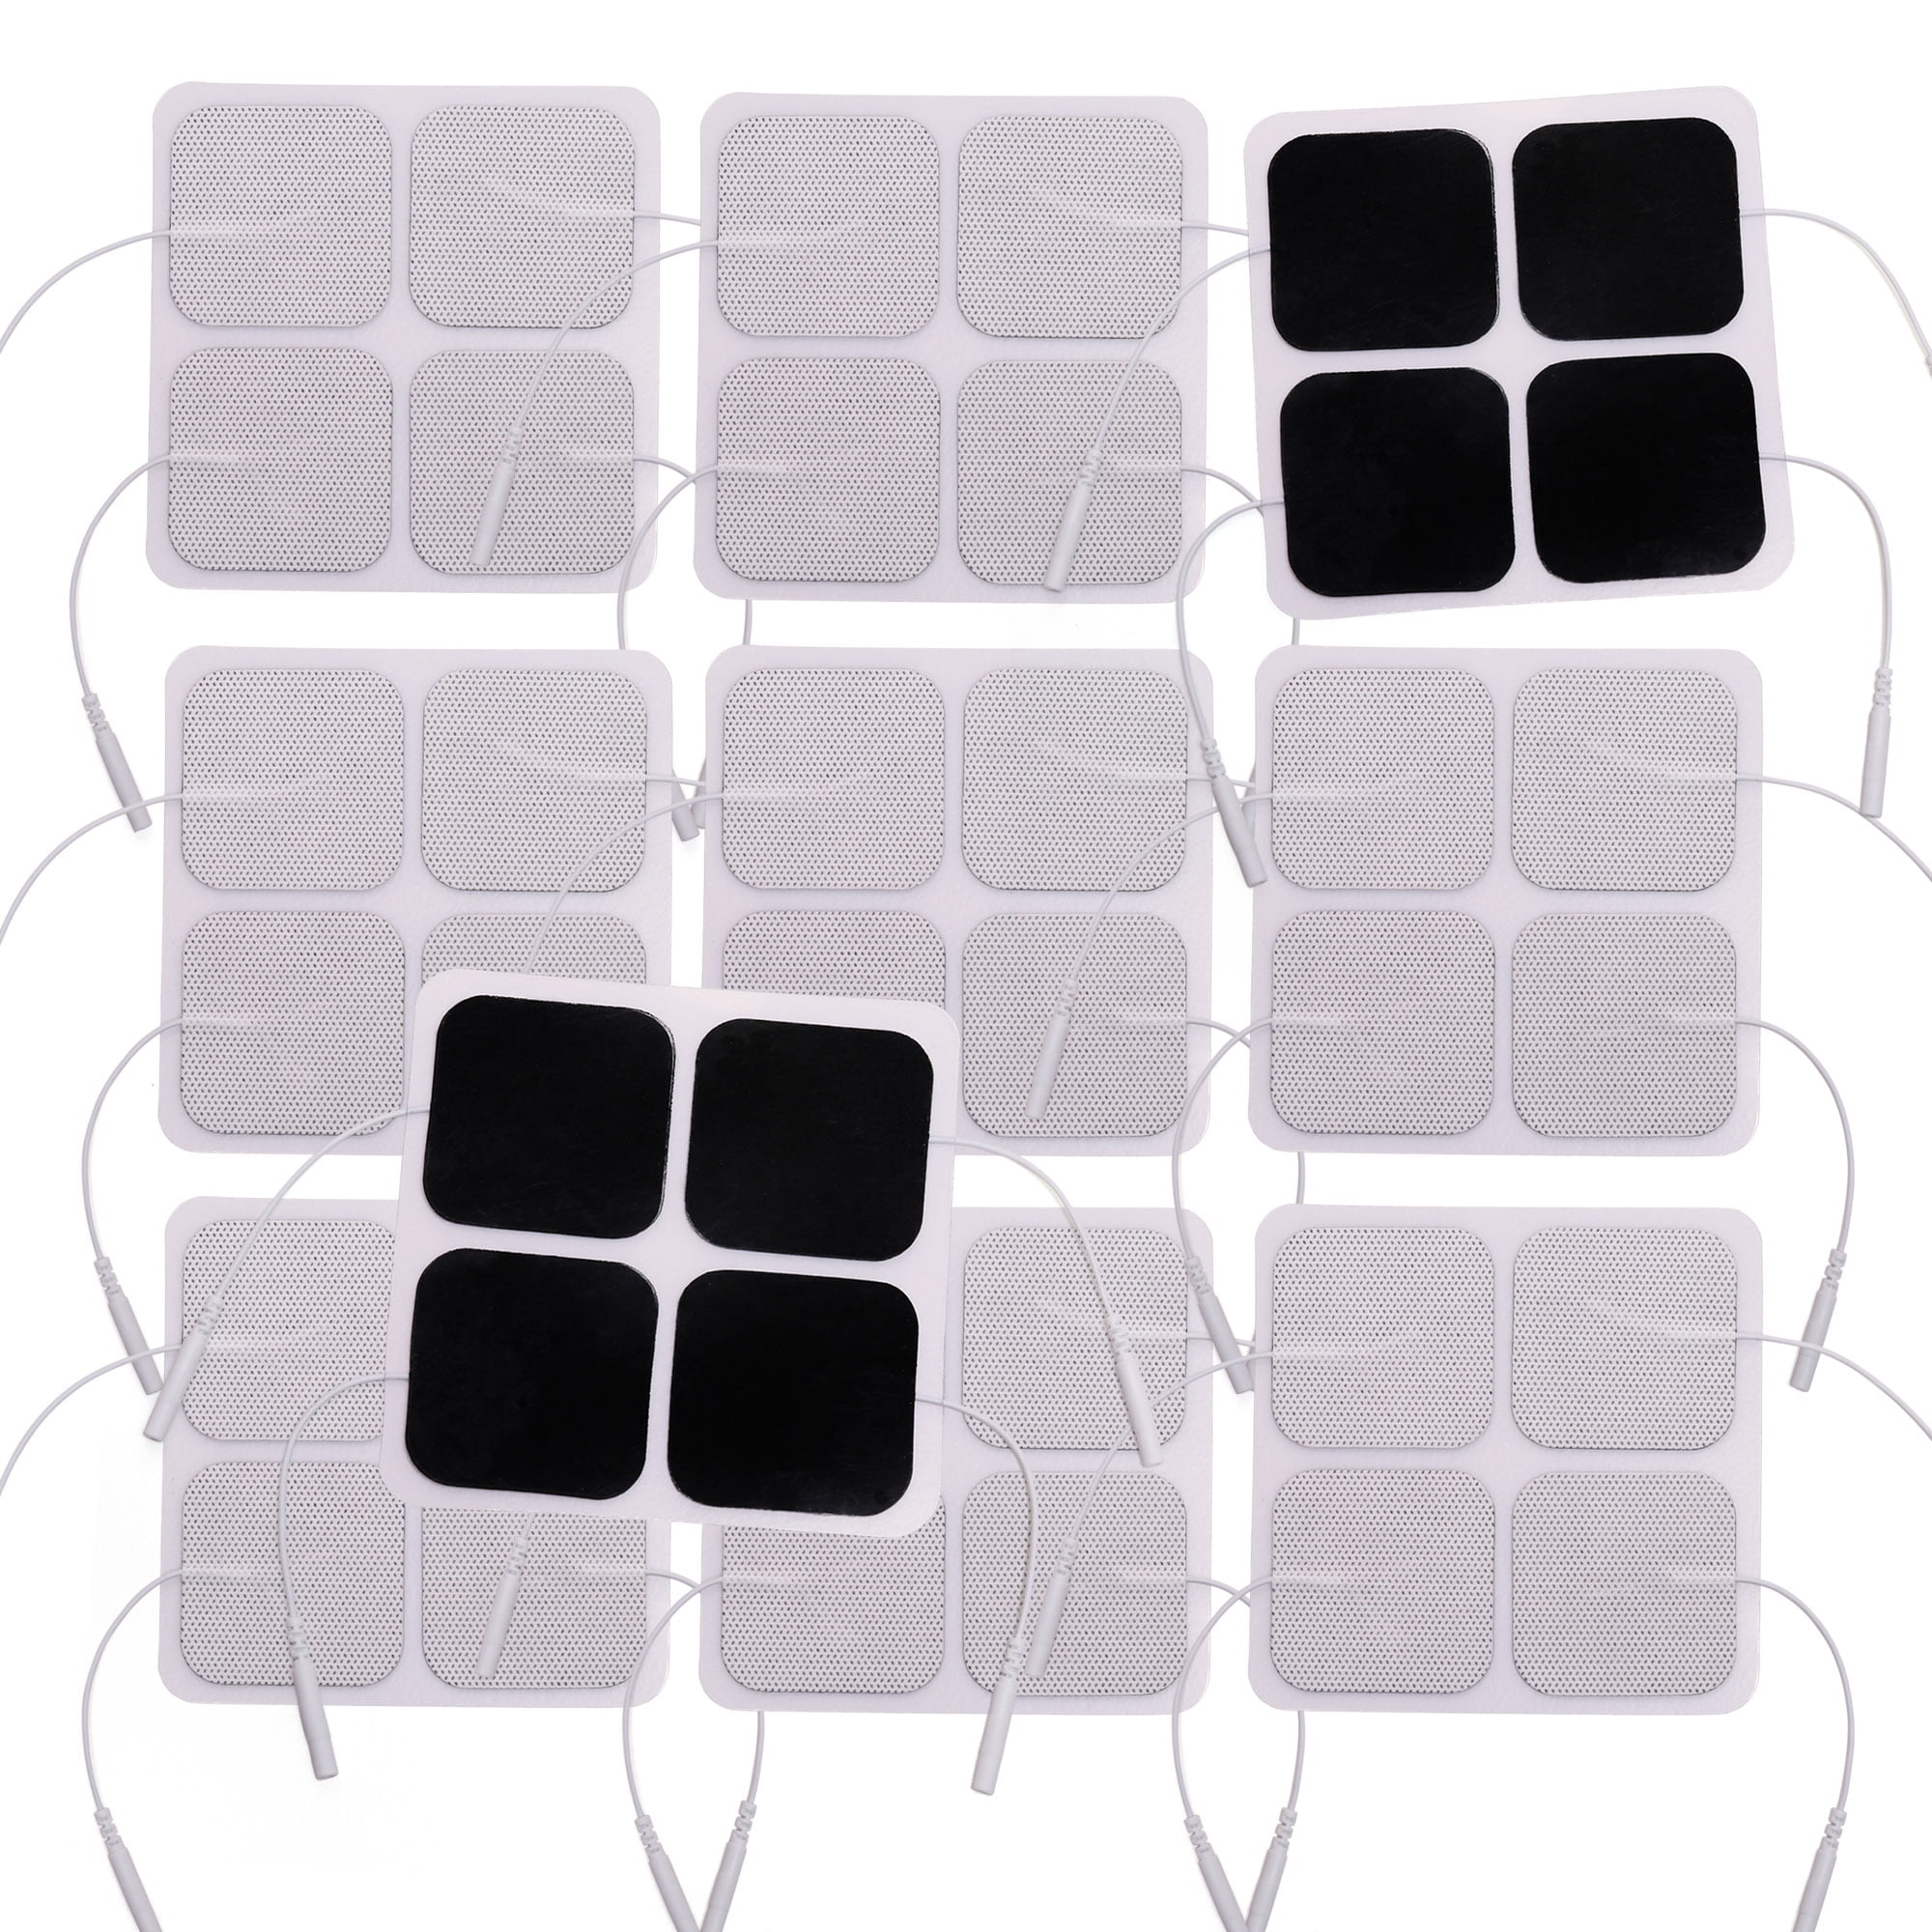 TENS Unit Replacement Pads, 8 PCS Premium Thickened Reusable Self-Adhesive  Electrode Pads for EMS Muscle Stimulator Massager